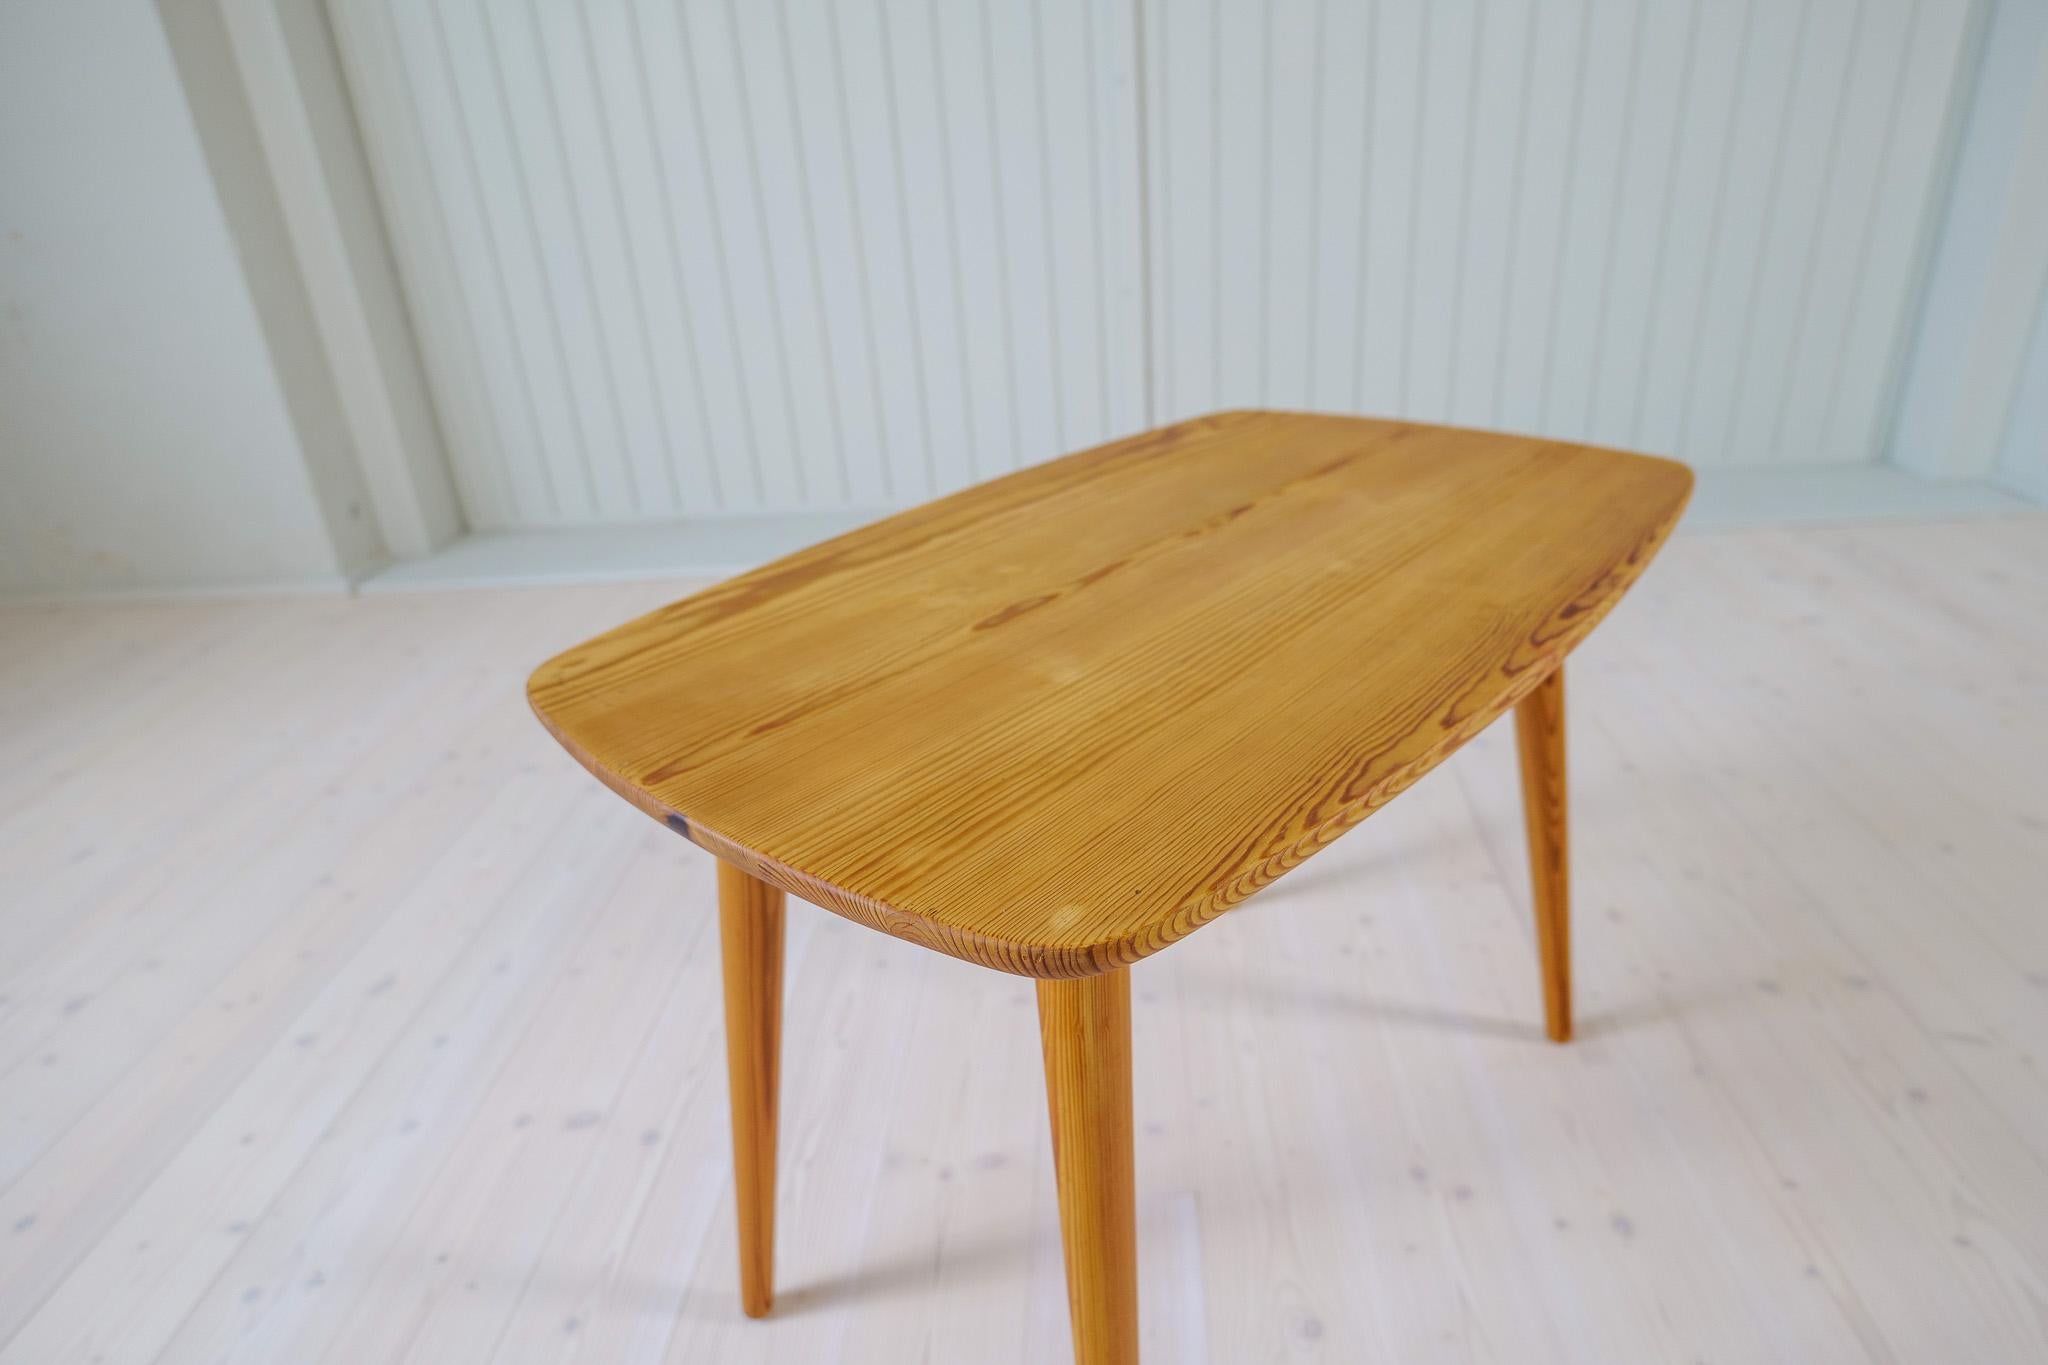 Midcentury Modern Coffe Table in Pine Sweden 1940s For Sale 4